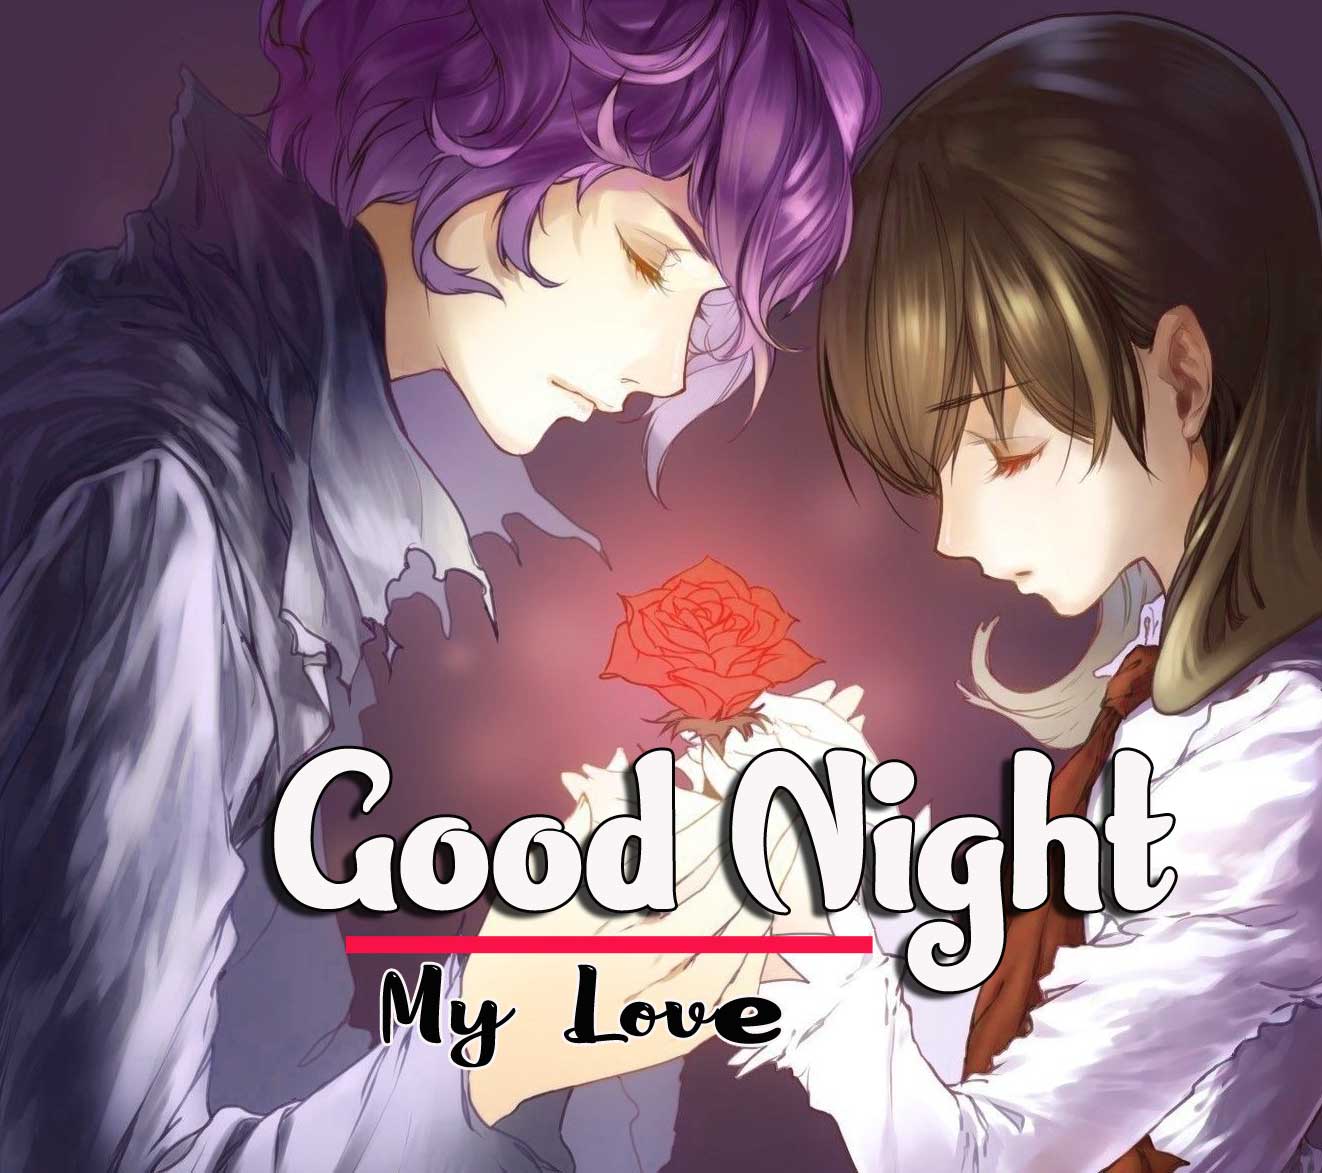 Good Night Wishes Images Wallpaper Free Download 